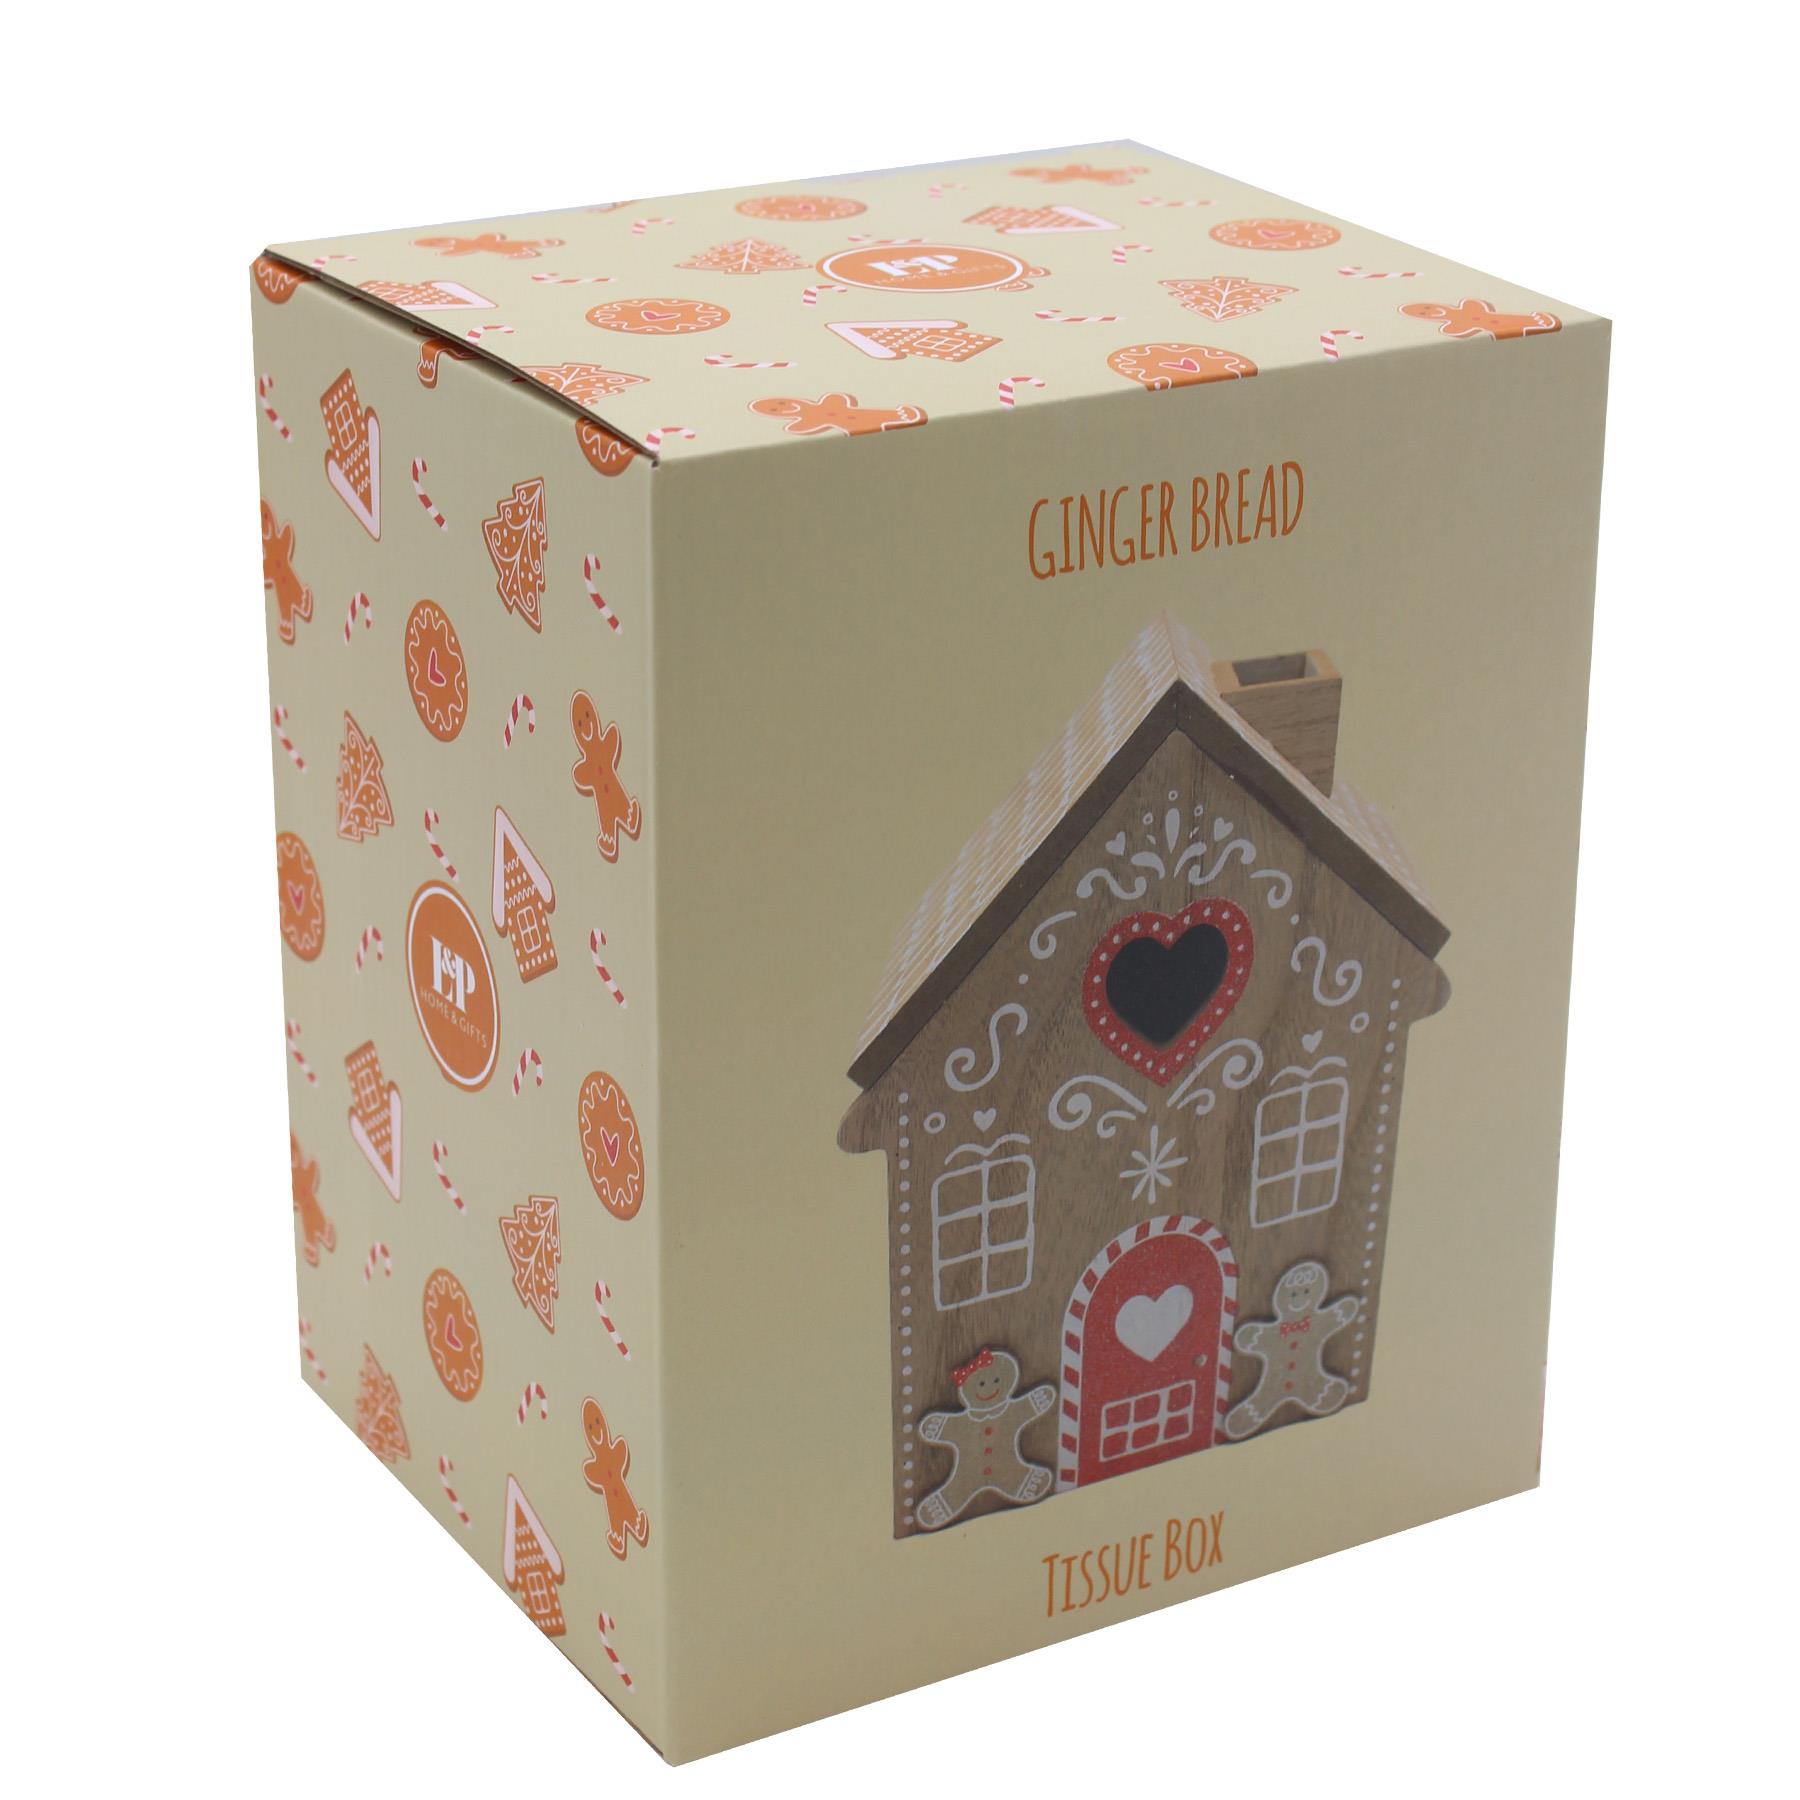 Christmas Decorations Tissue Box Gingerbread Wooden 22.5cm x 18cm